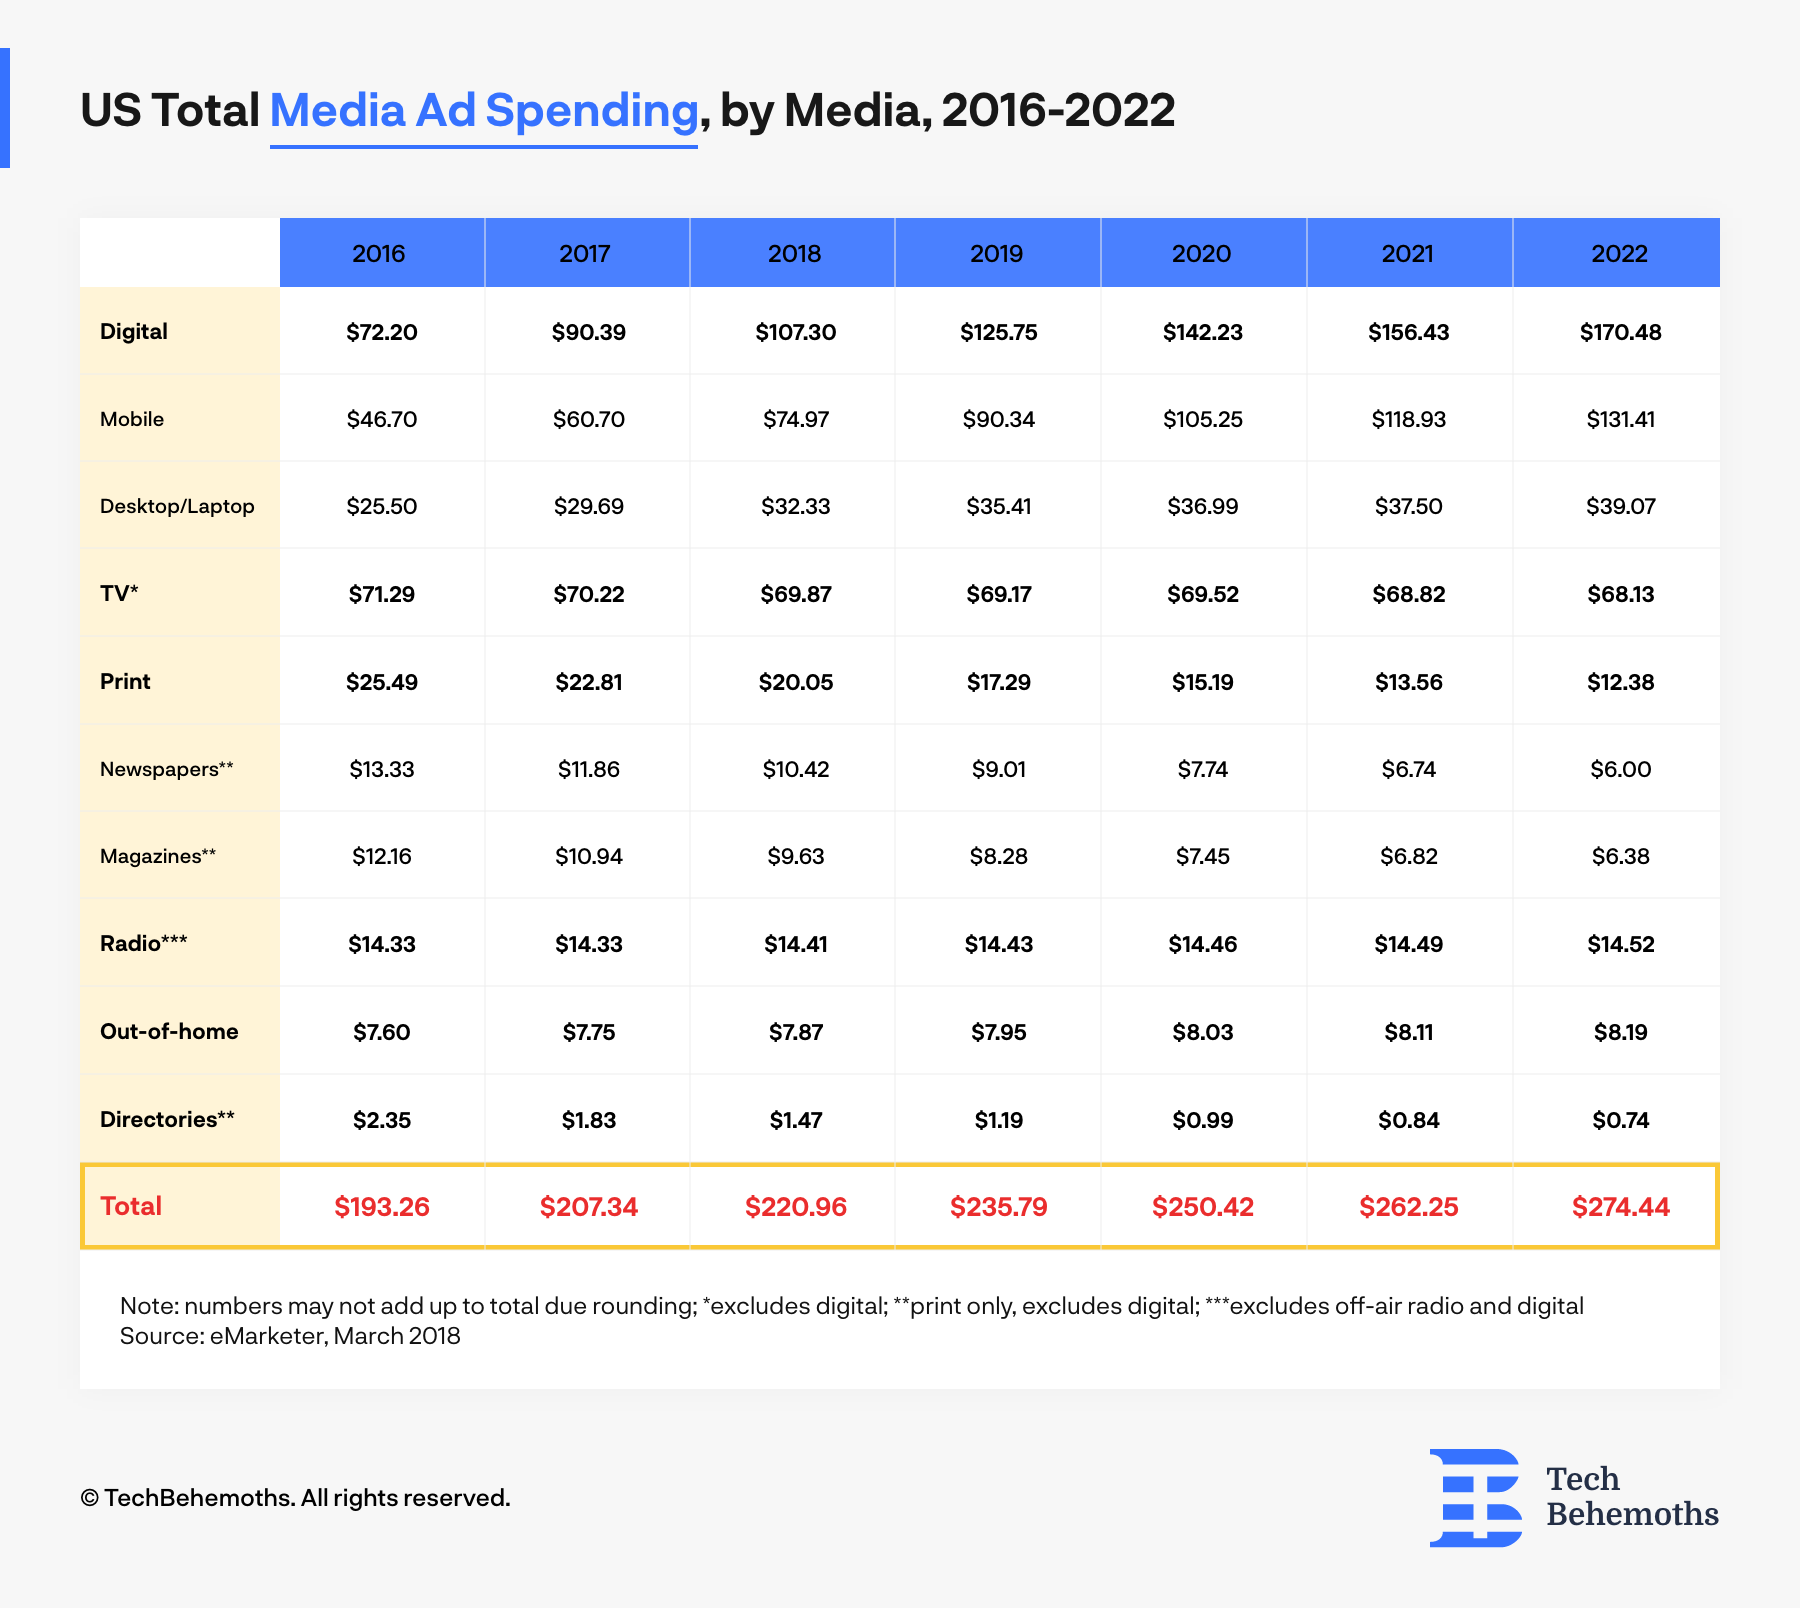 The total send on marketing ads in the US between 2016-2022